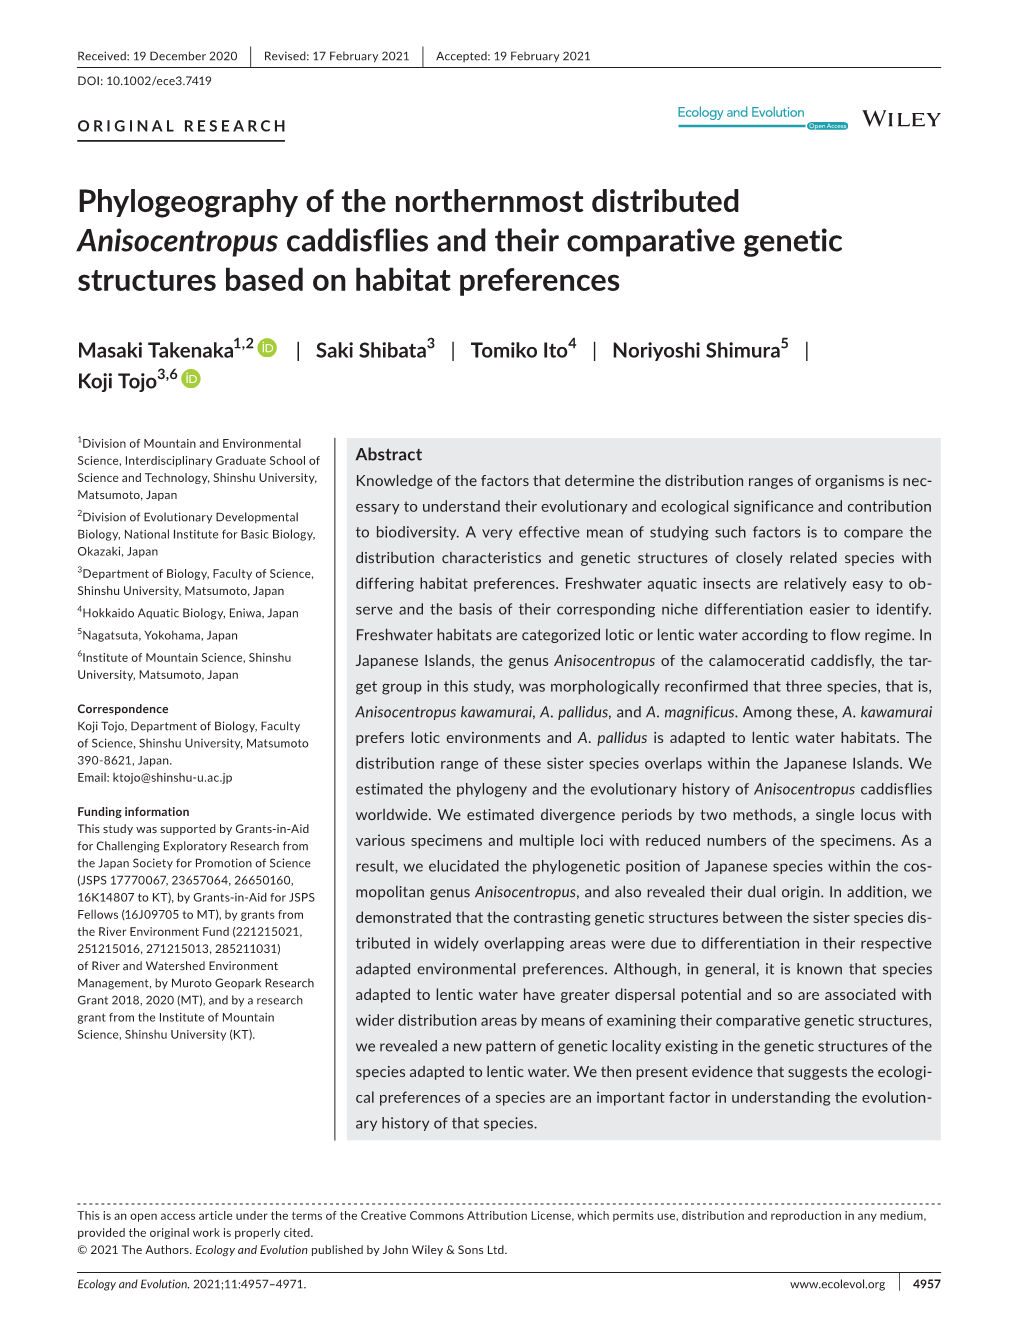 Phylogeography of the Northernmost Distributed Anisocentropus Caddisflies and Their Comparative Genetic Structures Based on Habitat Preferences